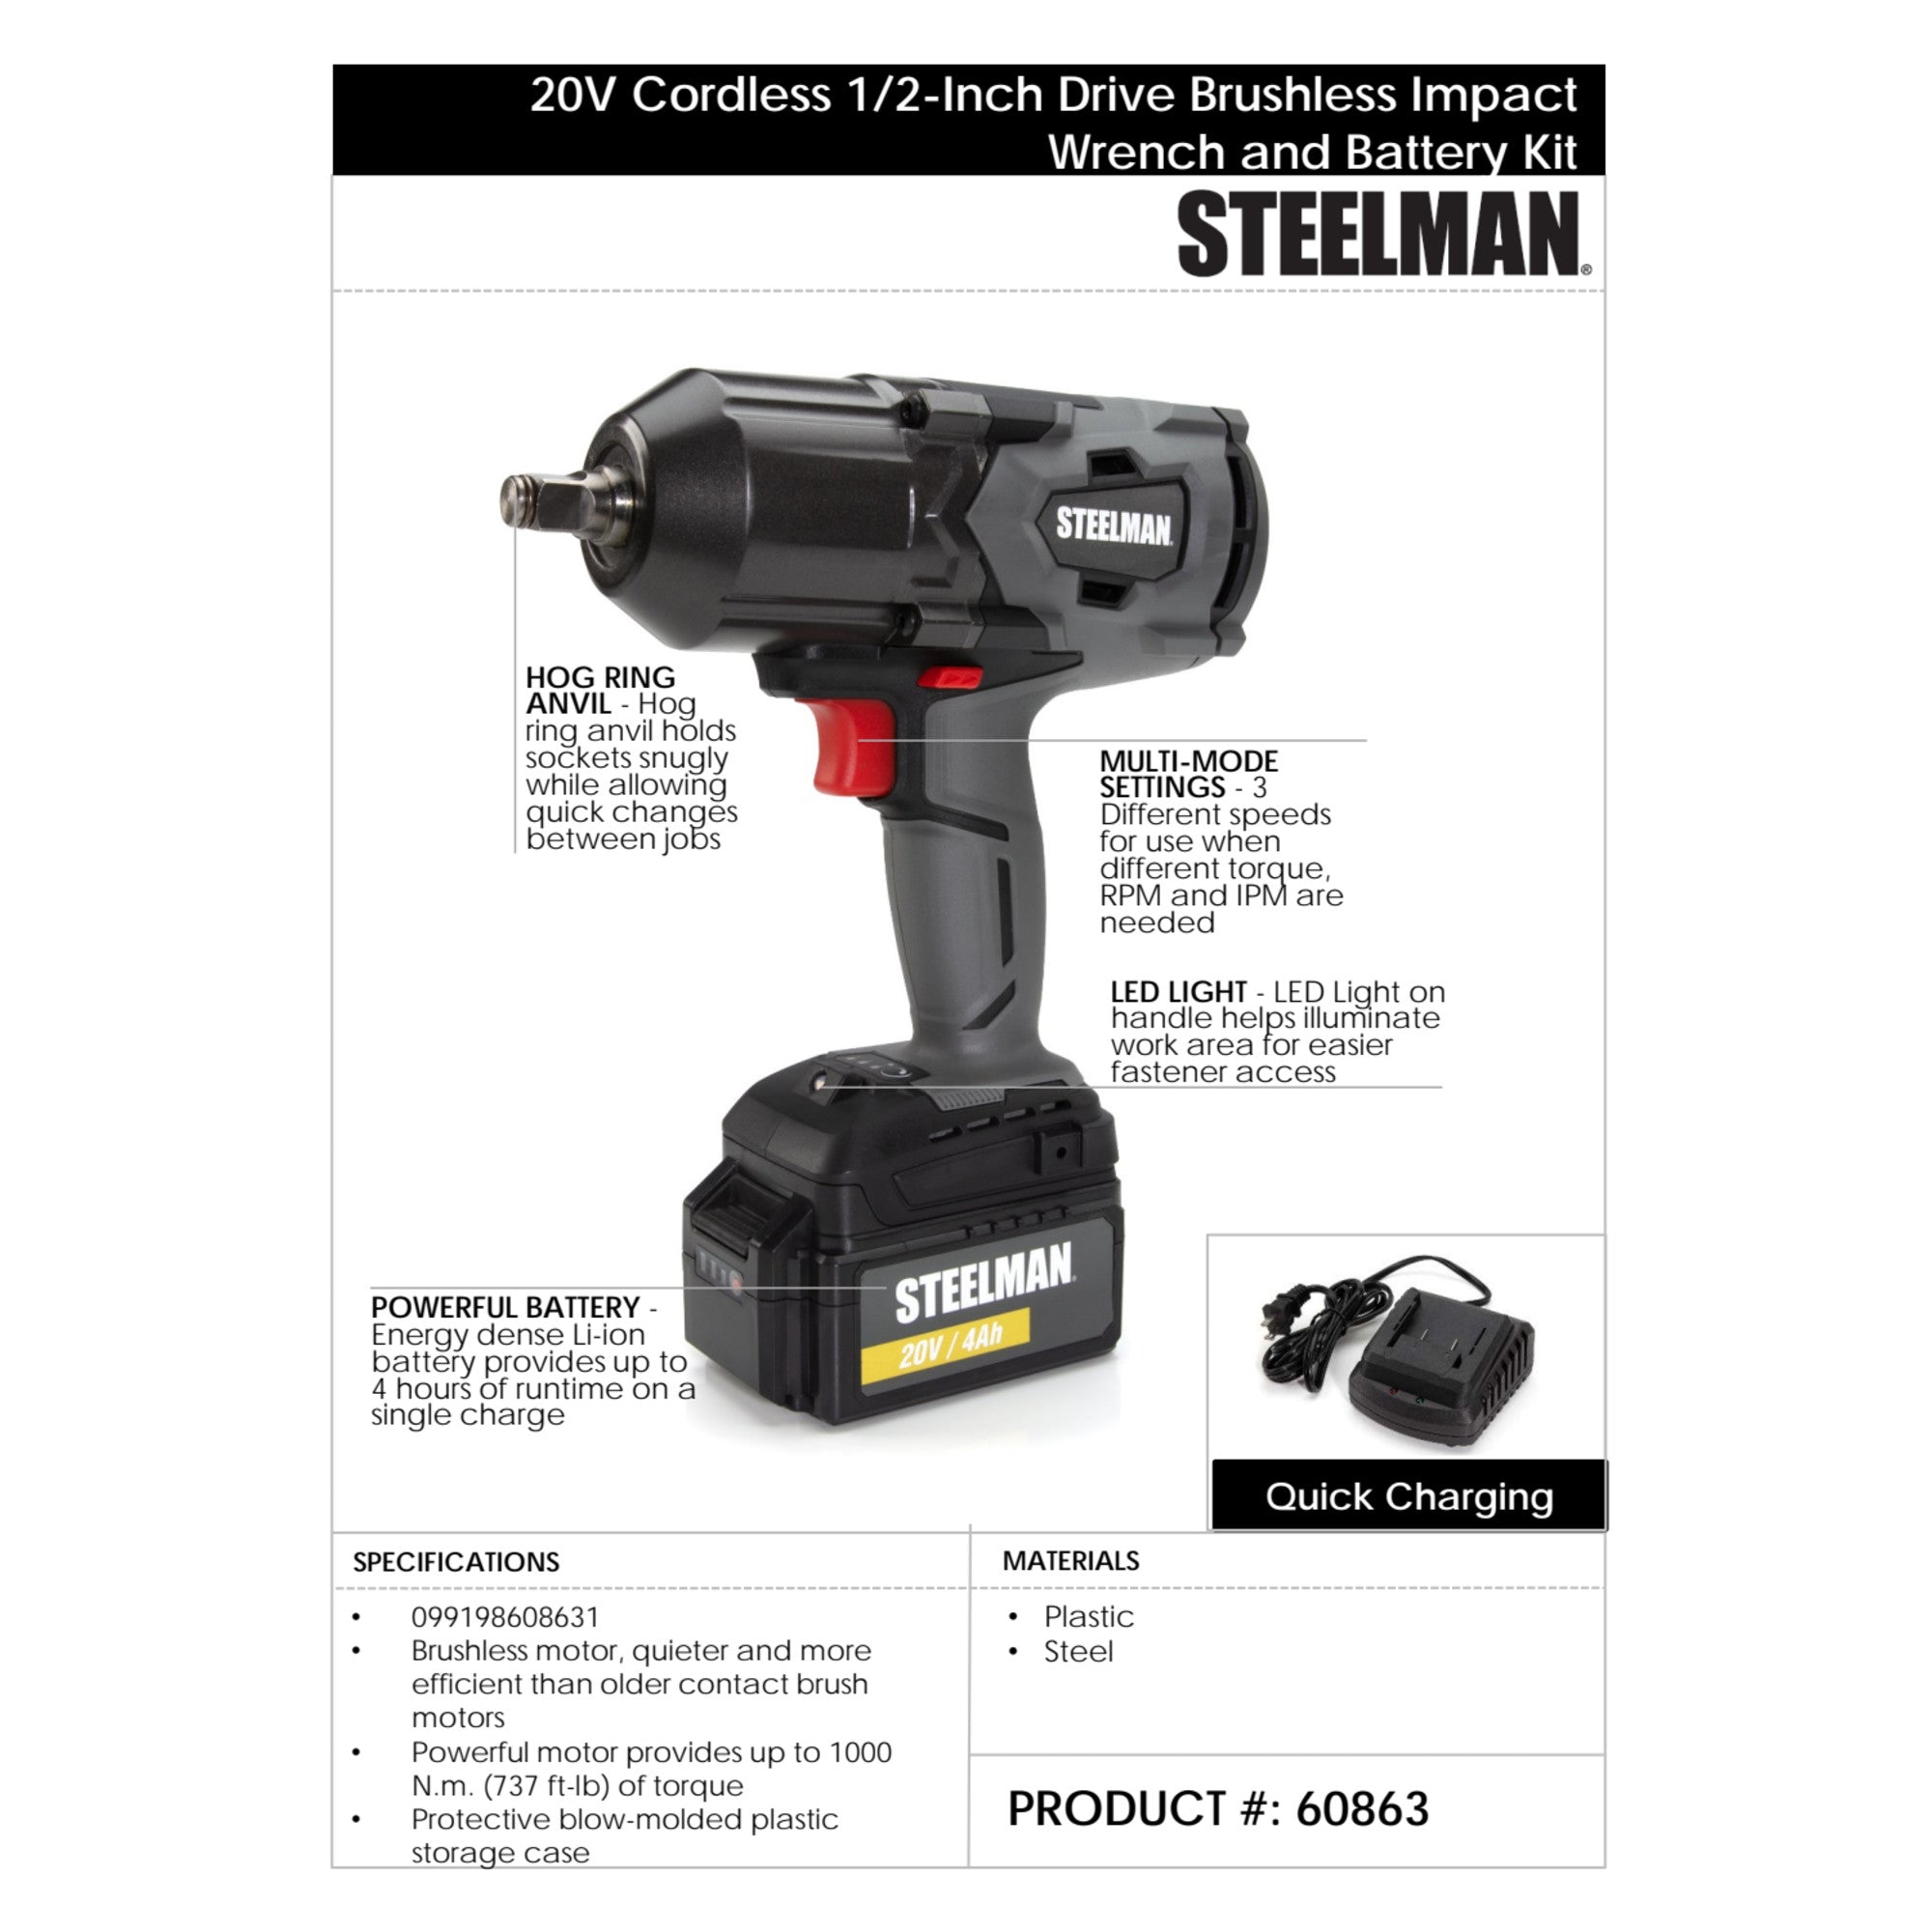 Steelman 20V Cordless 1/2-Inch Drive Brushless Impact Wrench And